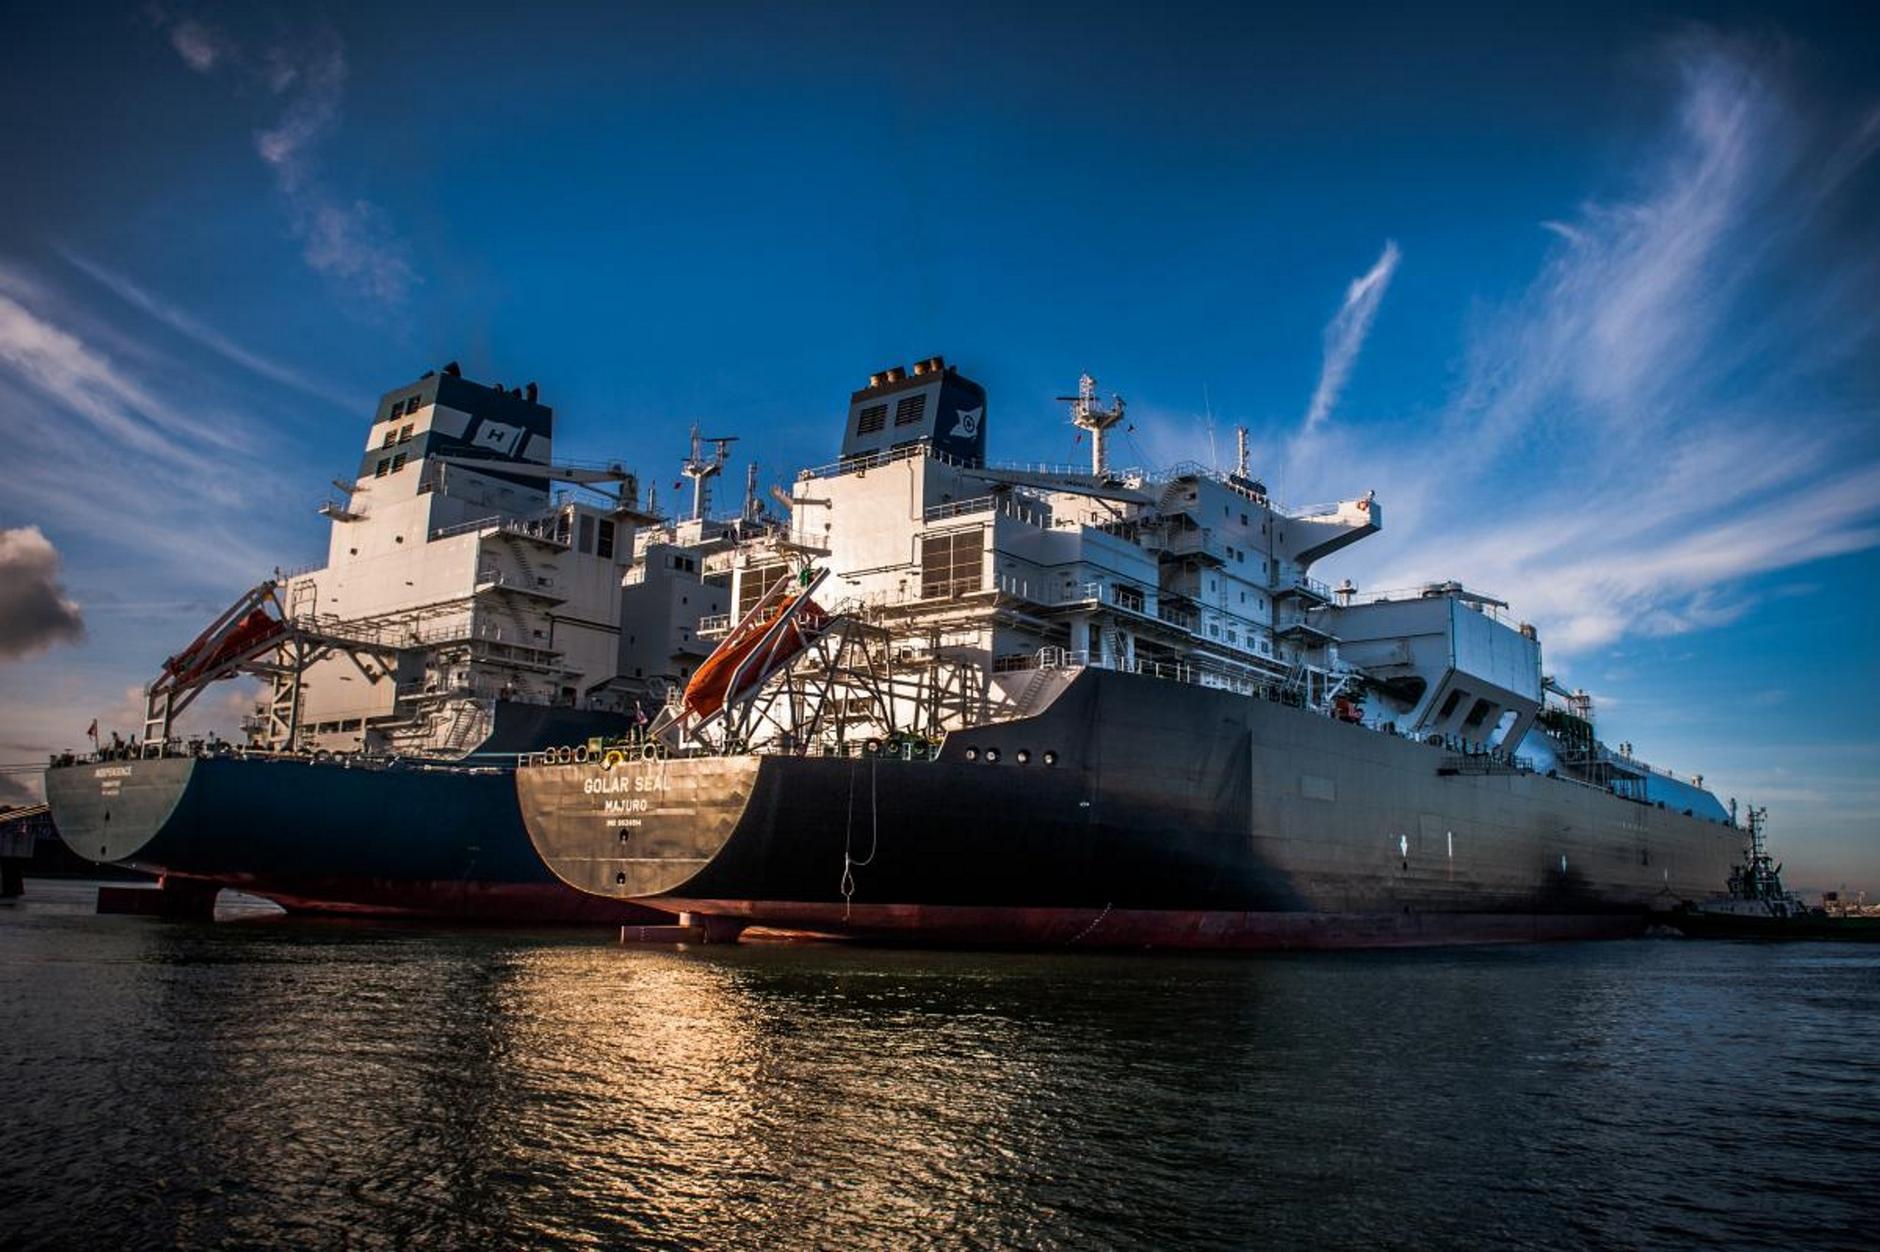 GNiG received the fifth cargo of LNG at Klaipeda